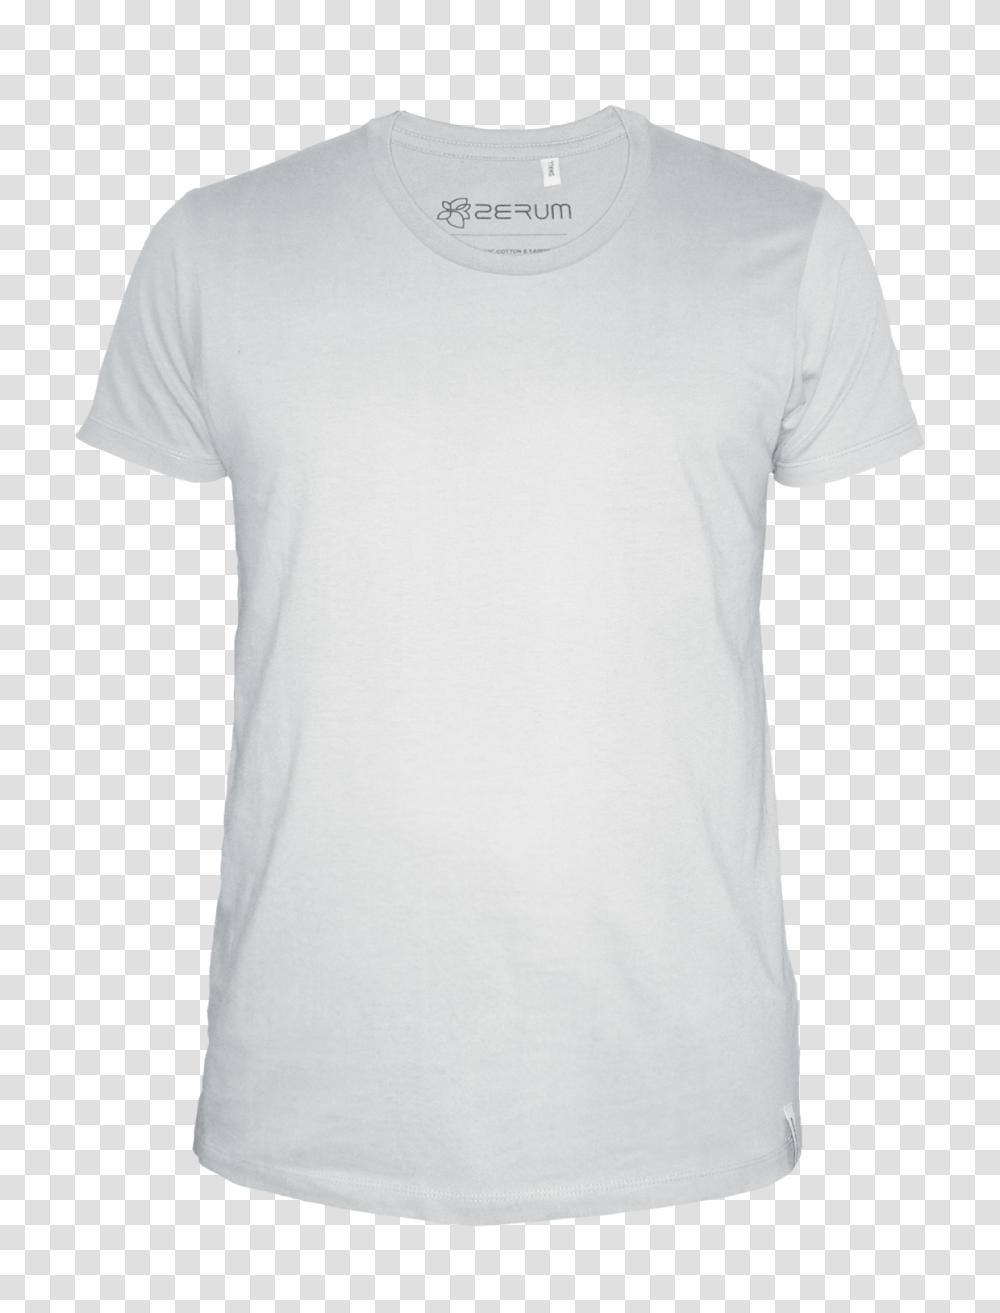 White T Shirt Template White T Shirt Clipart Free Download, Apparel, T-Shirt, Sleeve Transparent Png